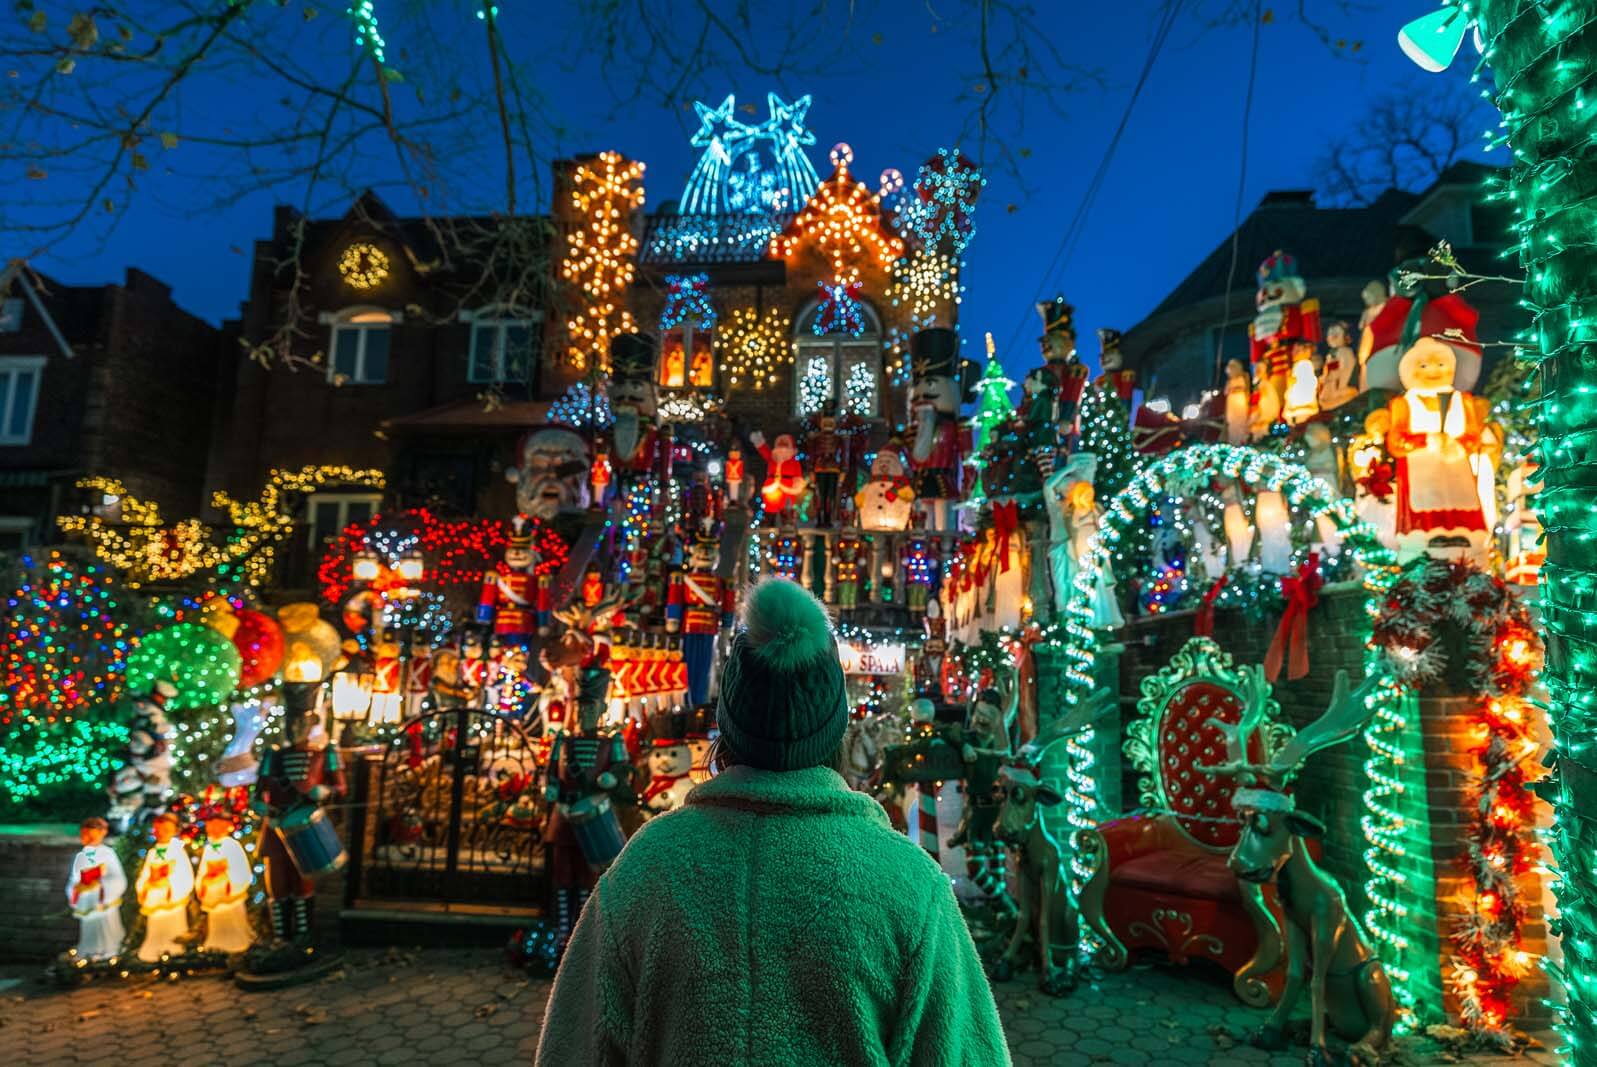 Looking at the Lucy Spata House in Dyker Heights at Christmas in Brooklyn